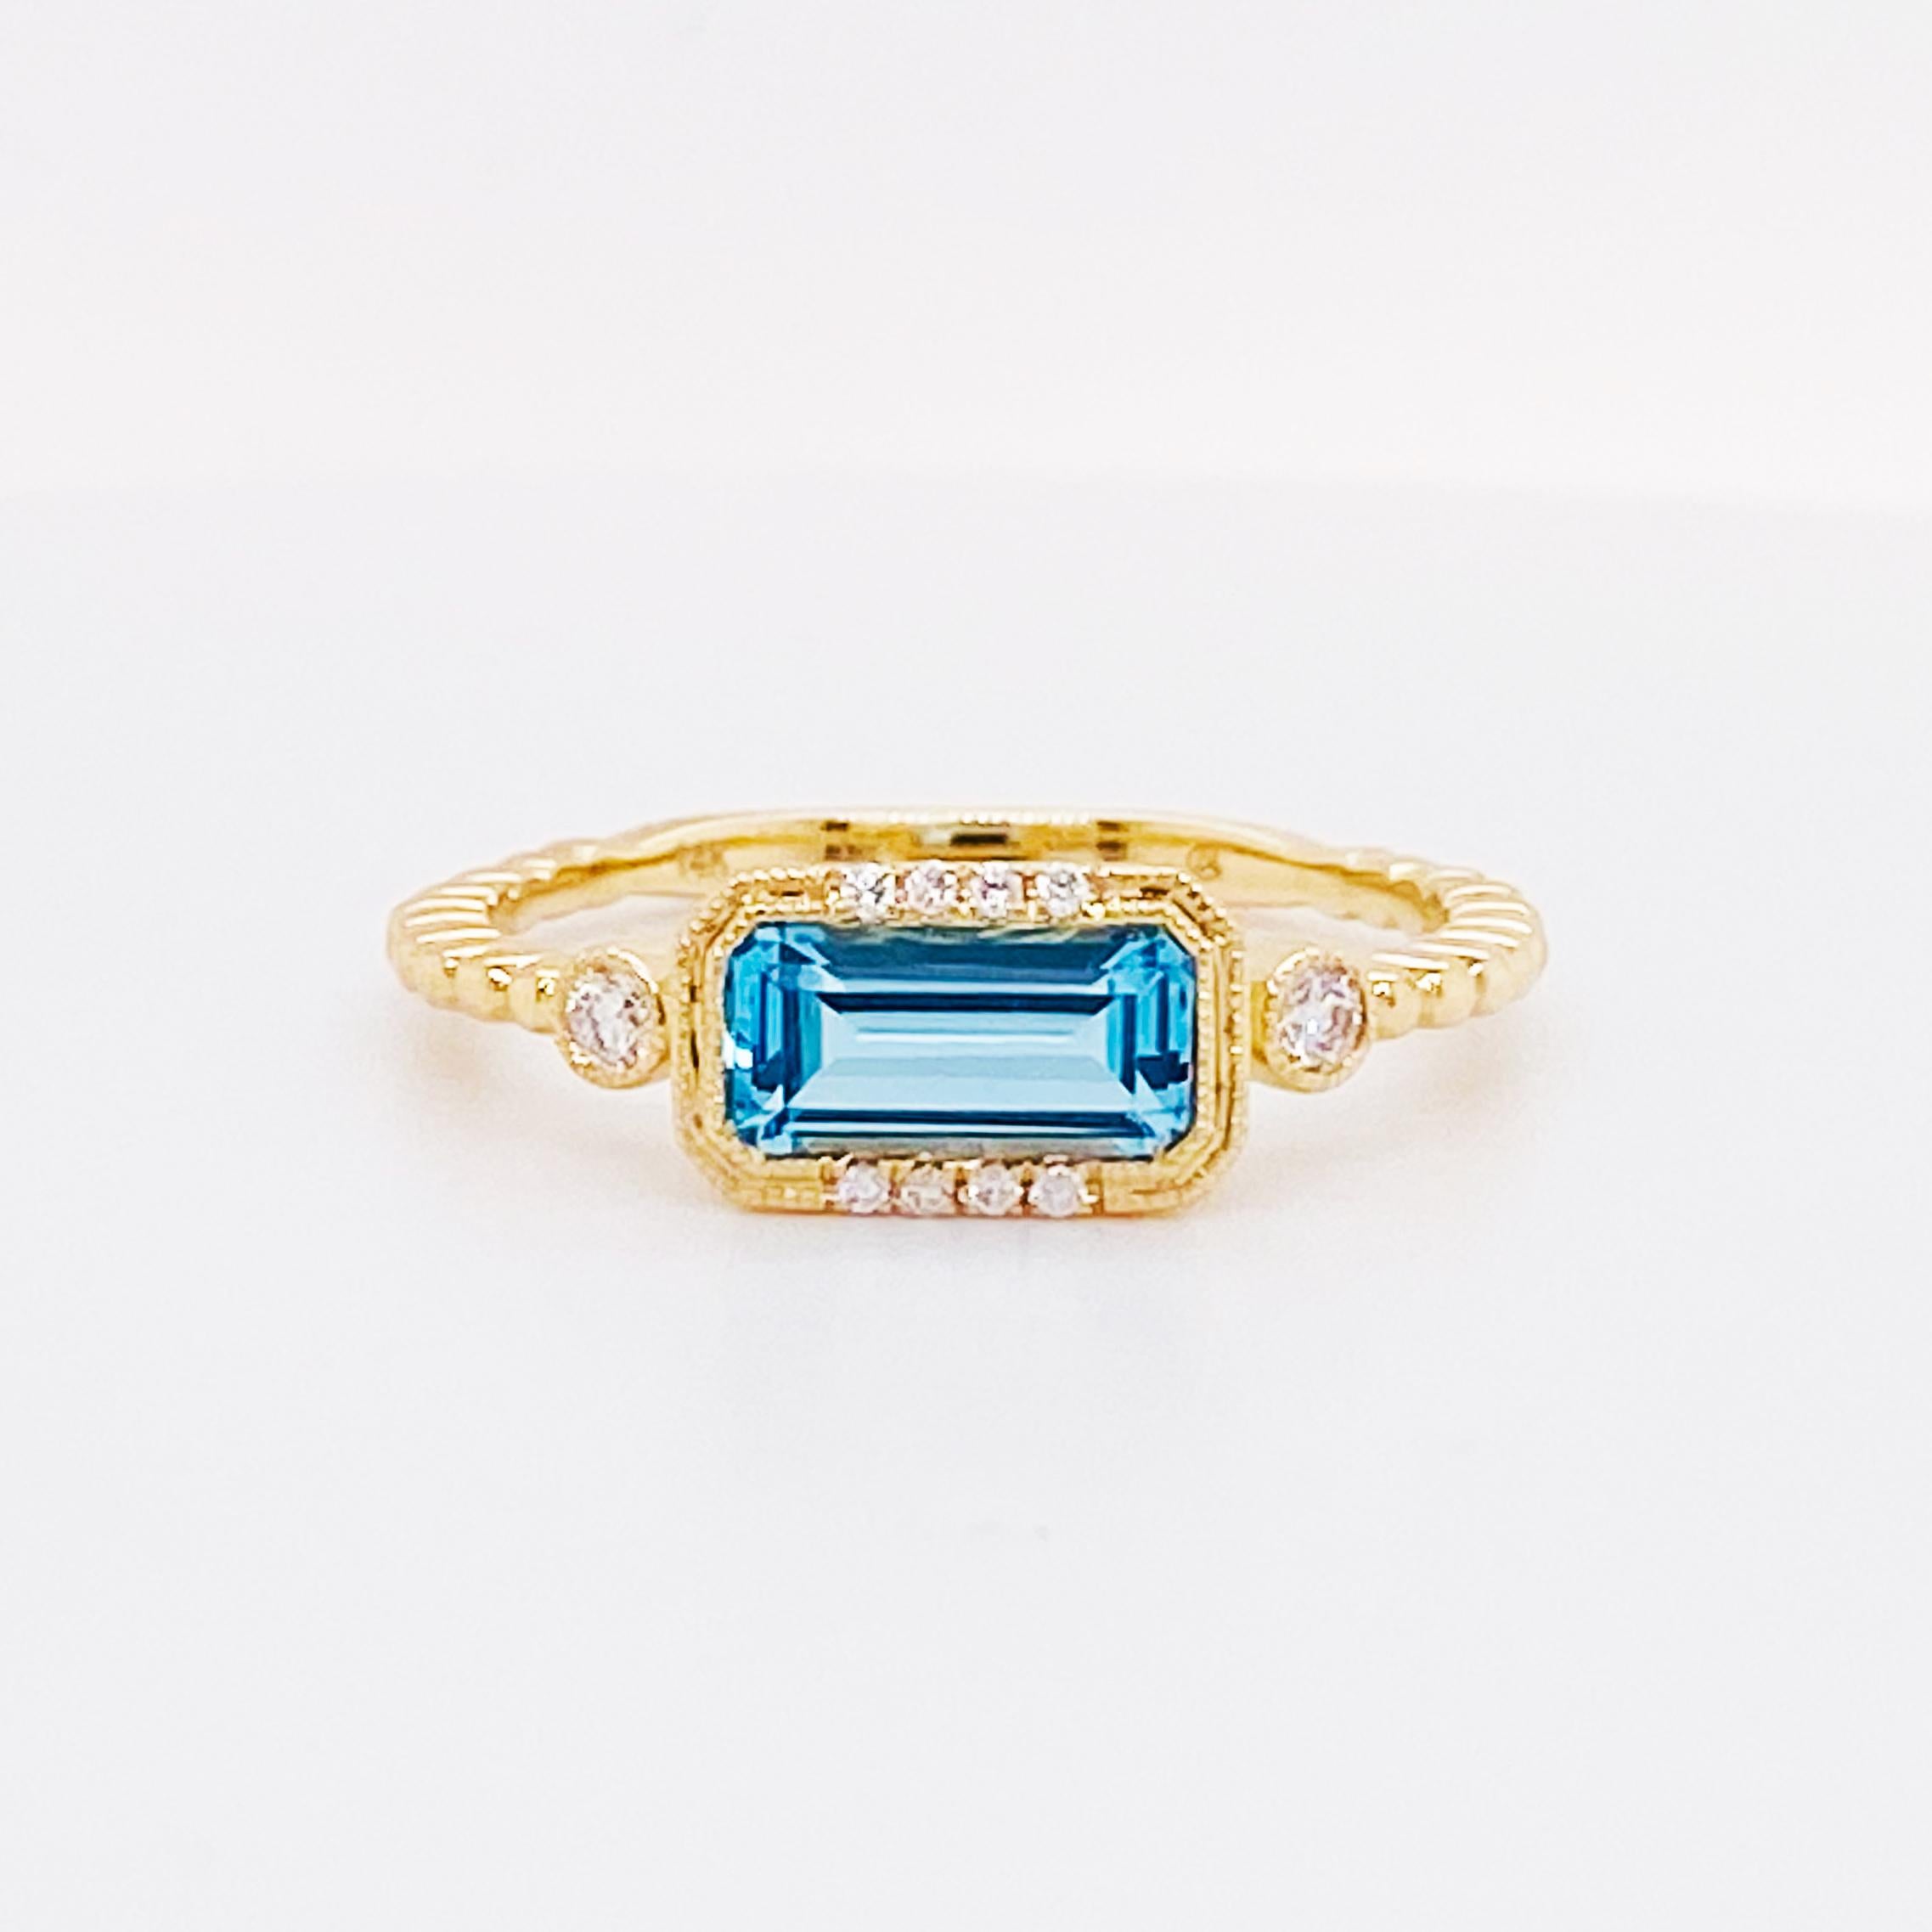 For Sale:  Blue Topaz Diamond Ring 14K Gold Emerald Cut Topaz Modern Ring, East to West 4